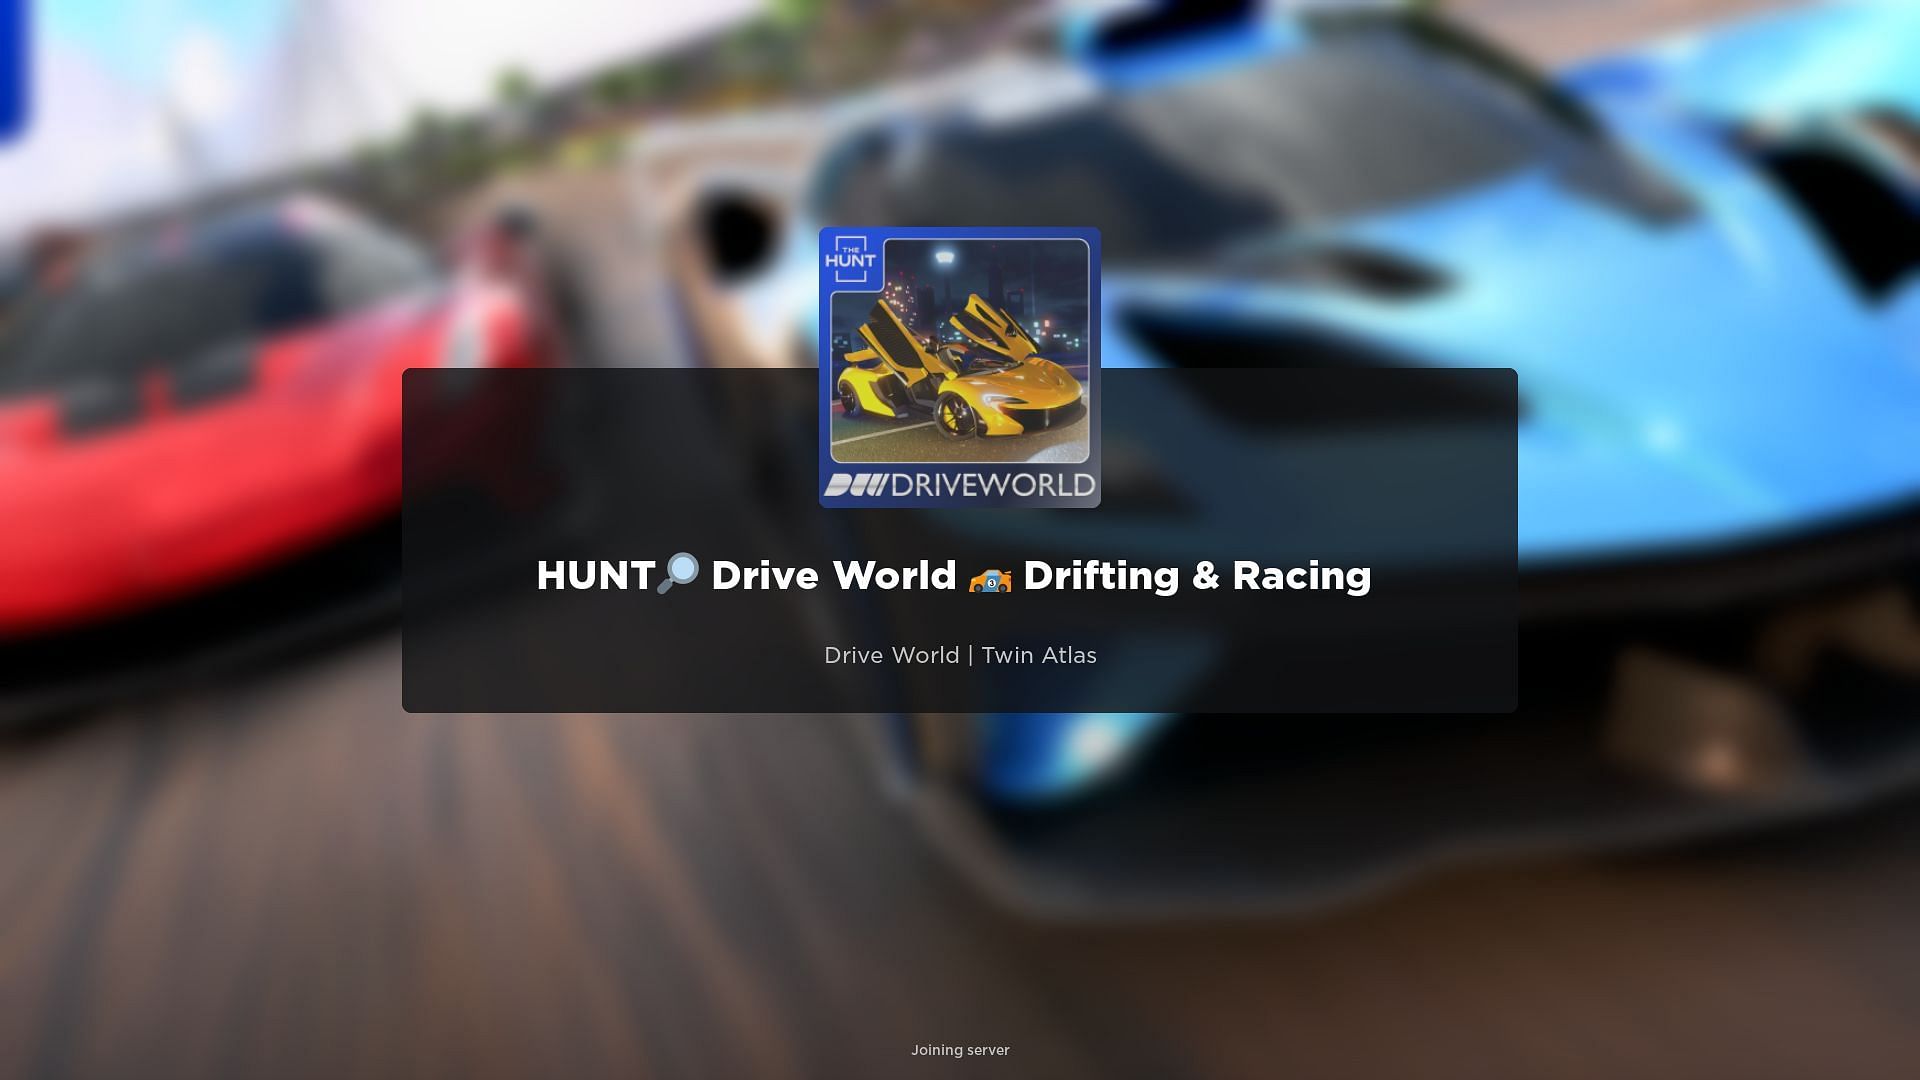 The Hunt in Drive World